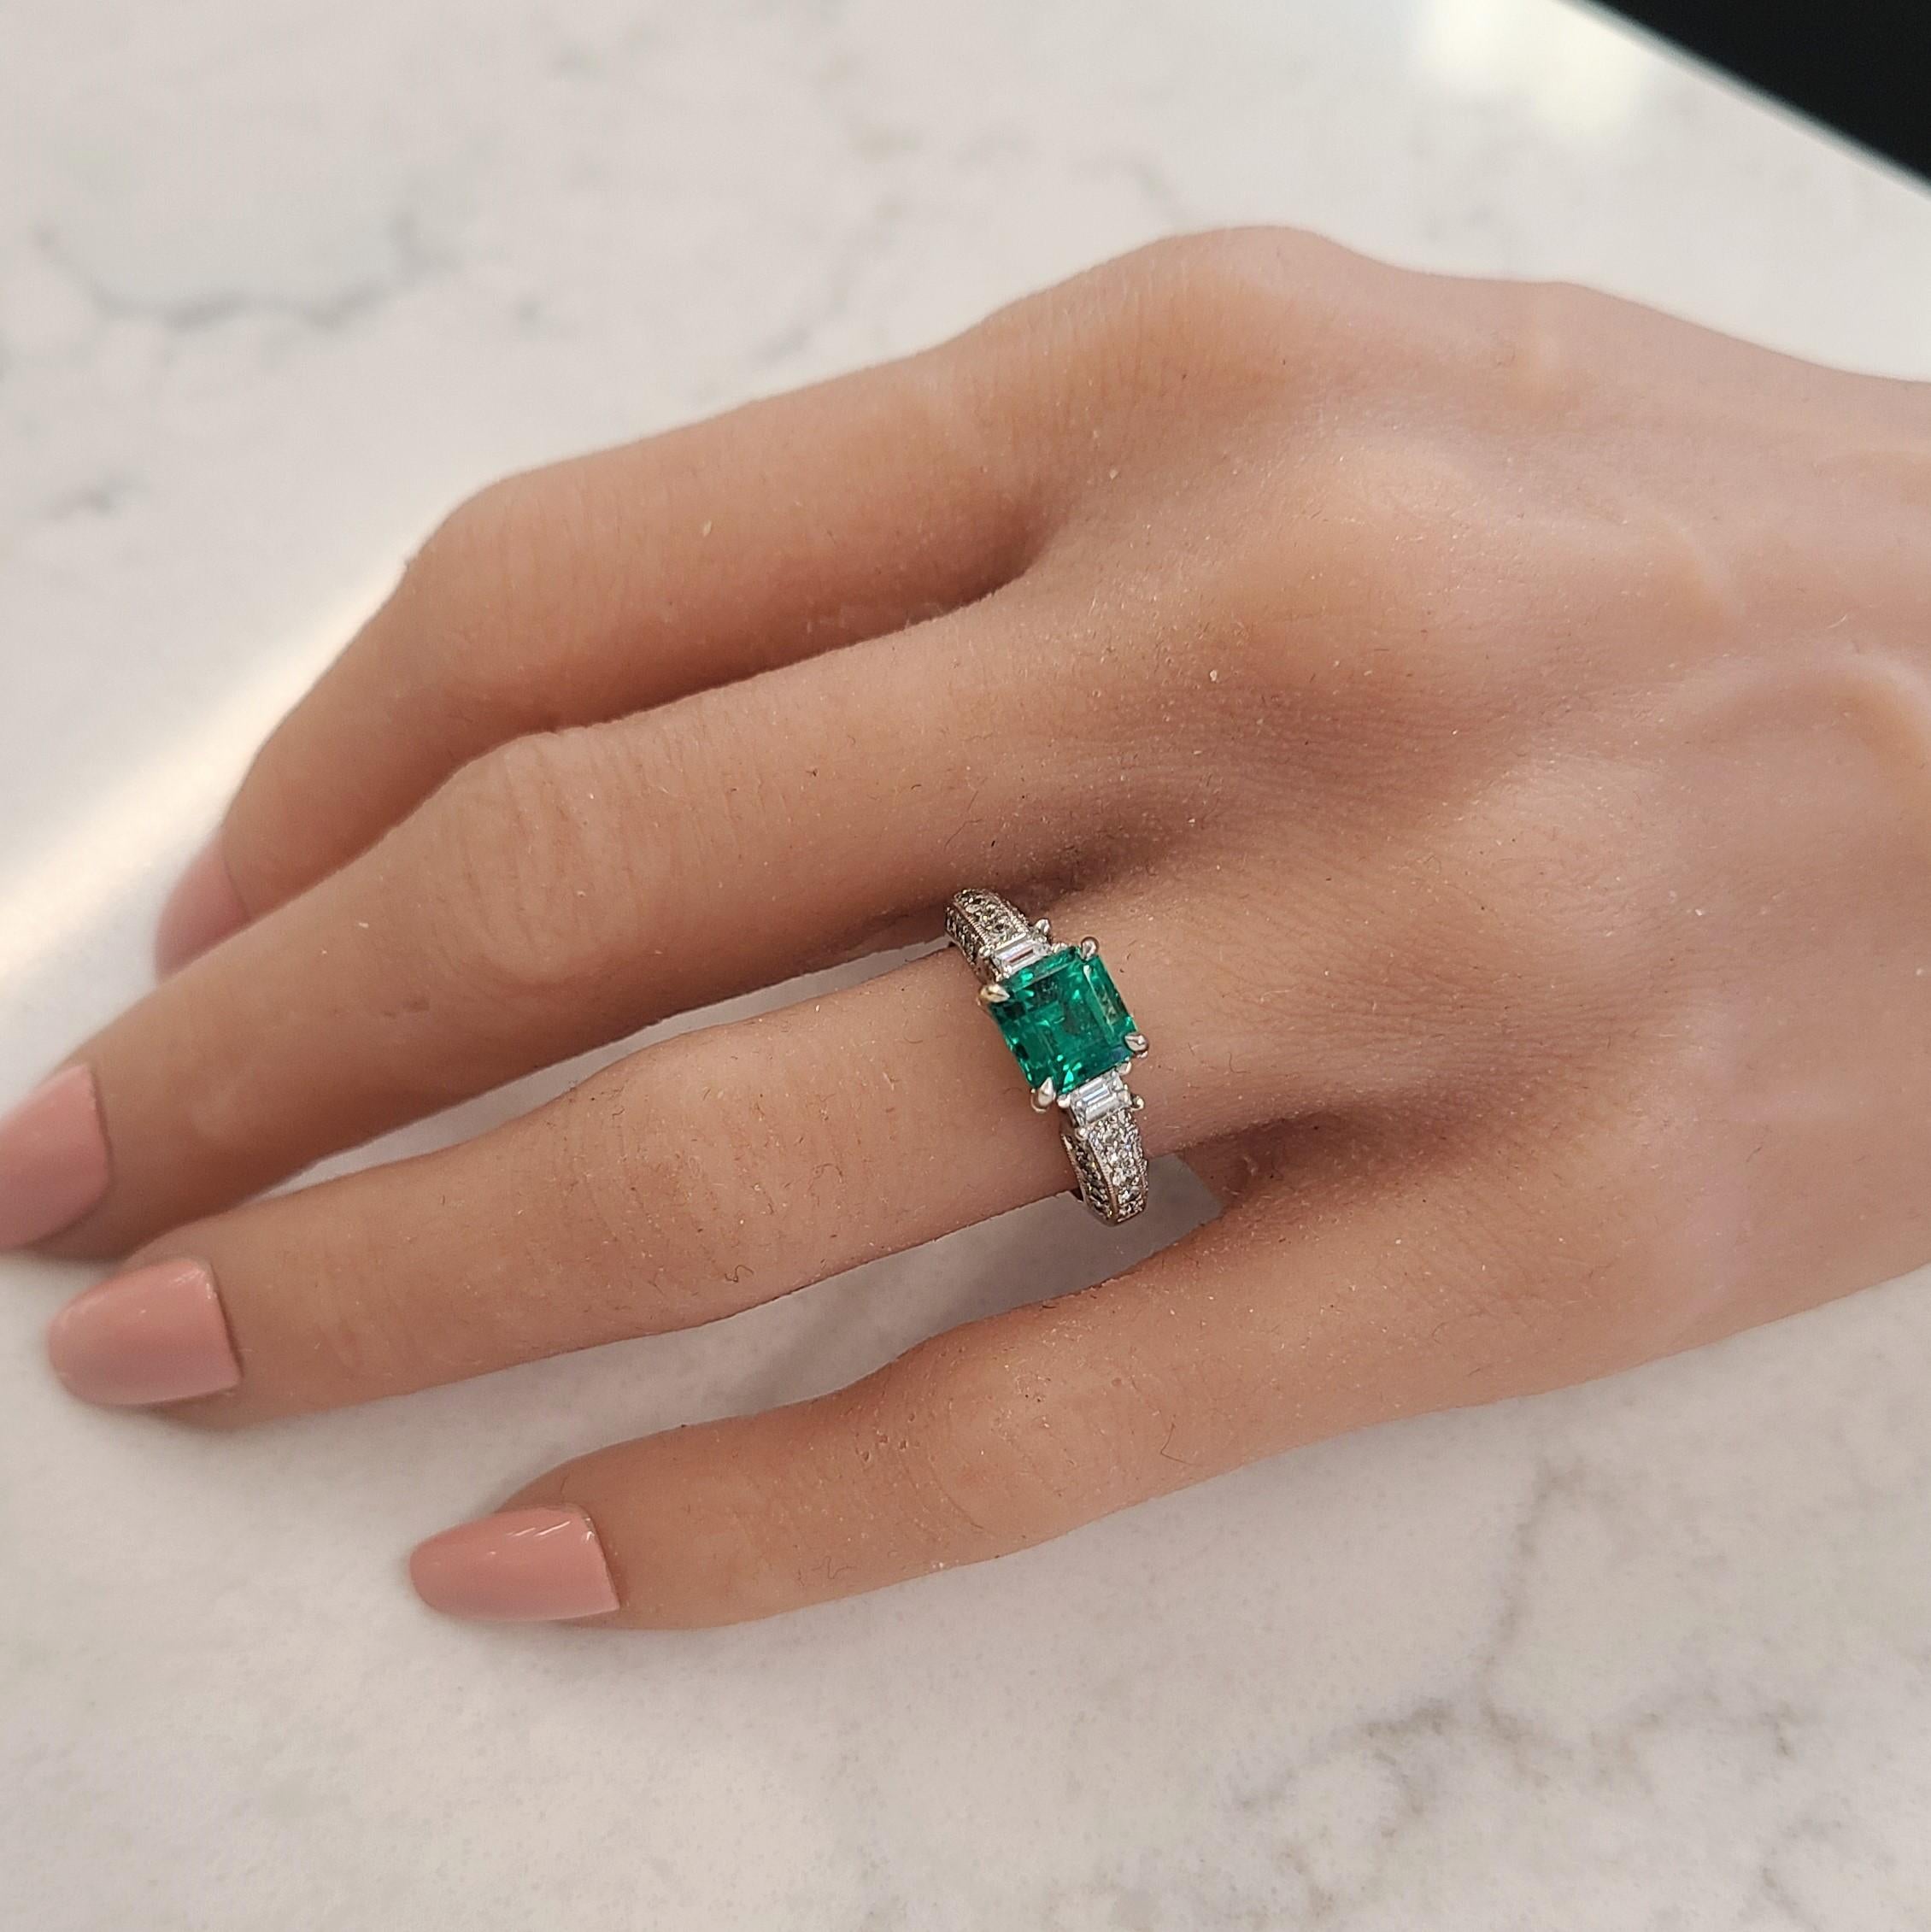 Women's 1.85 Carat Square Emerald & Diamond Cocktail Ring in 14 K White Gold For Sale